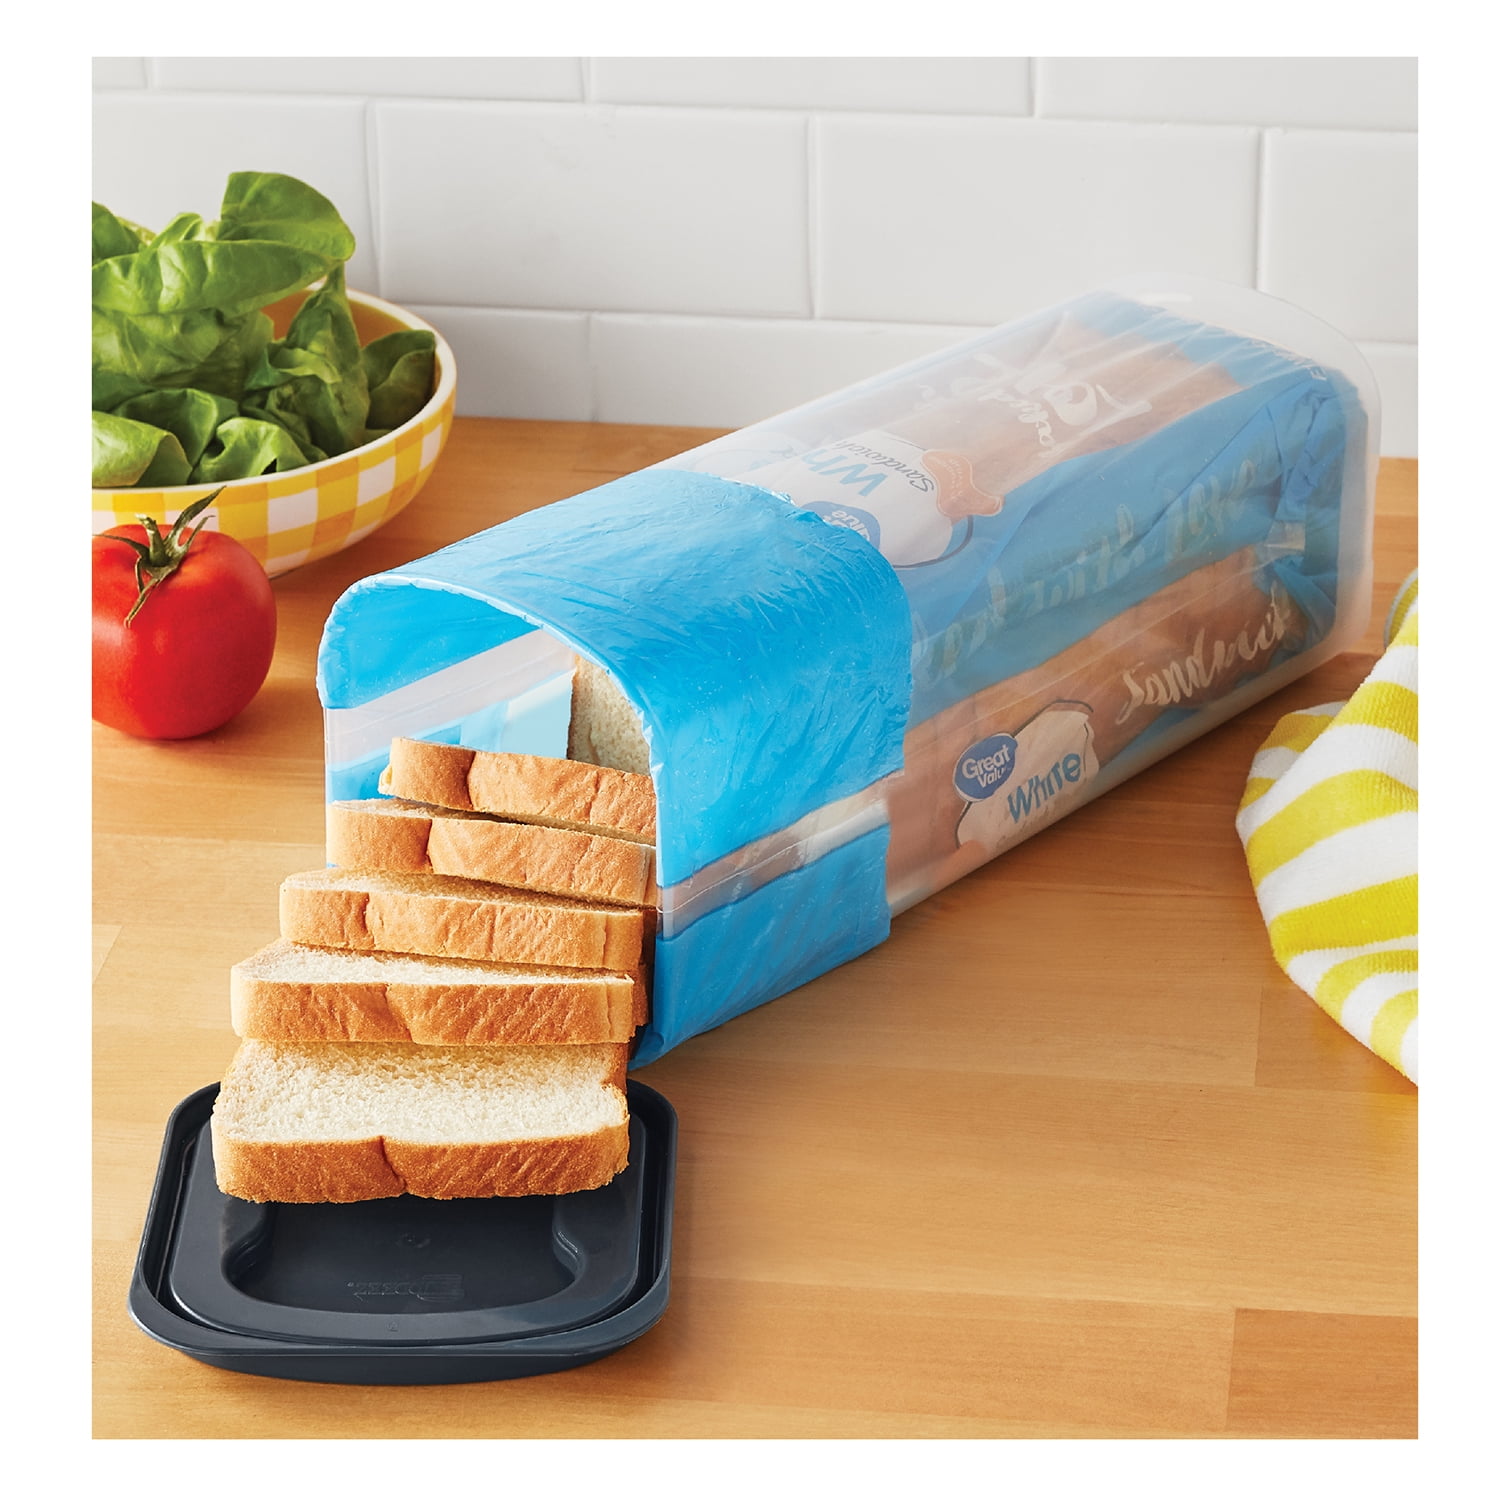 NAVAHN Bread Storage Container | Plastic Bread Box | Clear Plastic Fresh Bread Container | Bread Keeper with Airtight Lid | Bread Loaf Storage